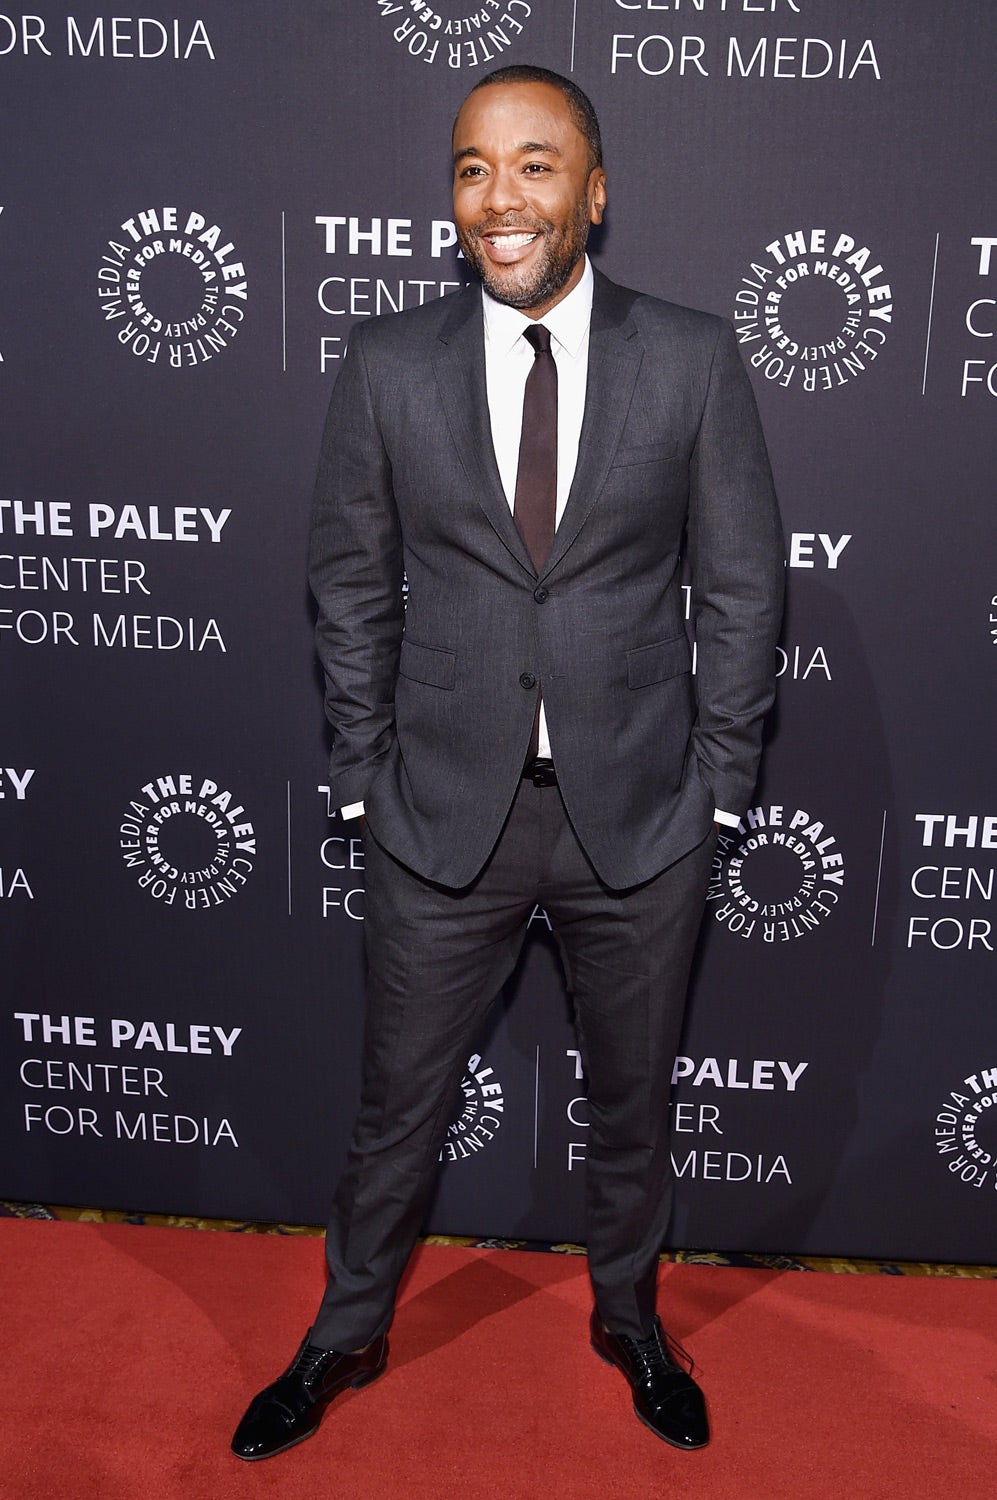 Paley Center Hosts Tribute to African-Americans on TV